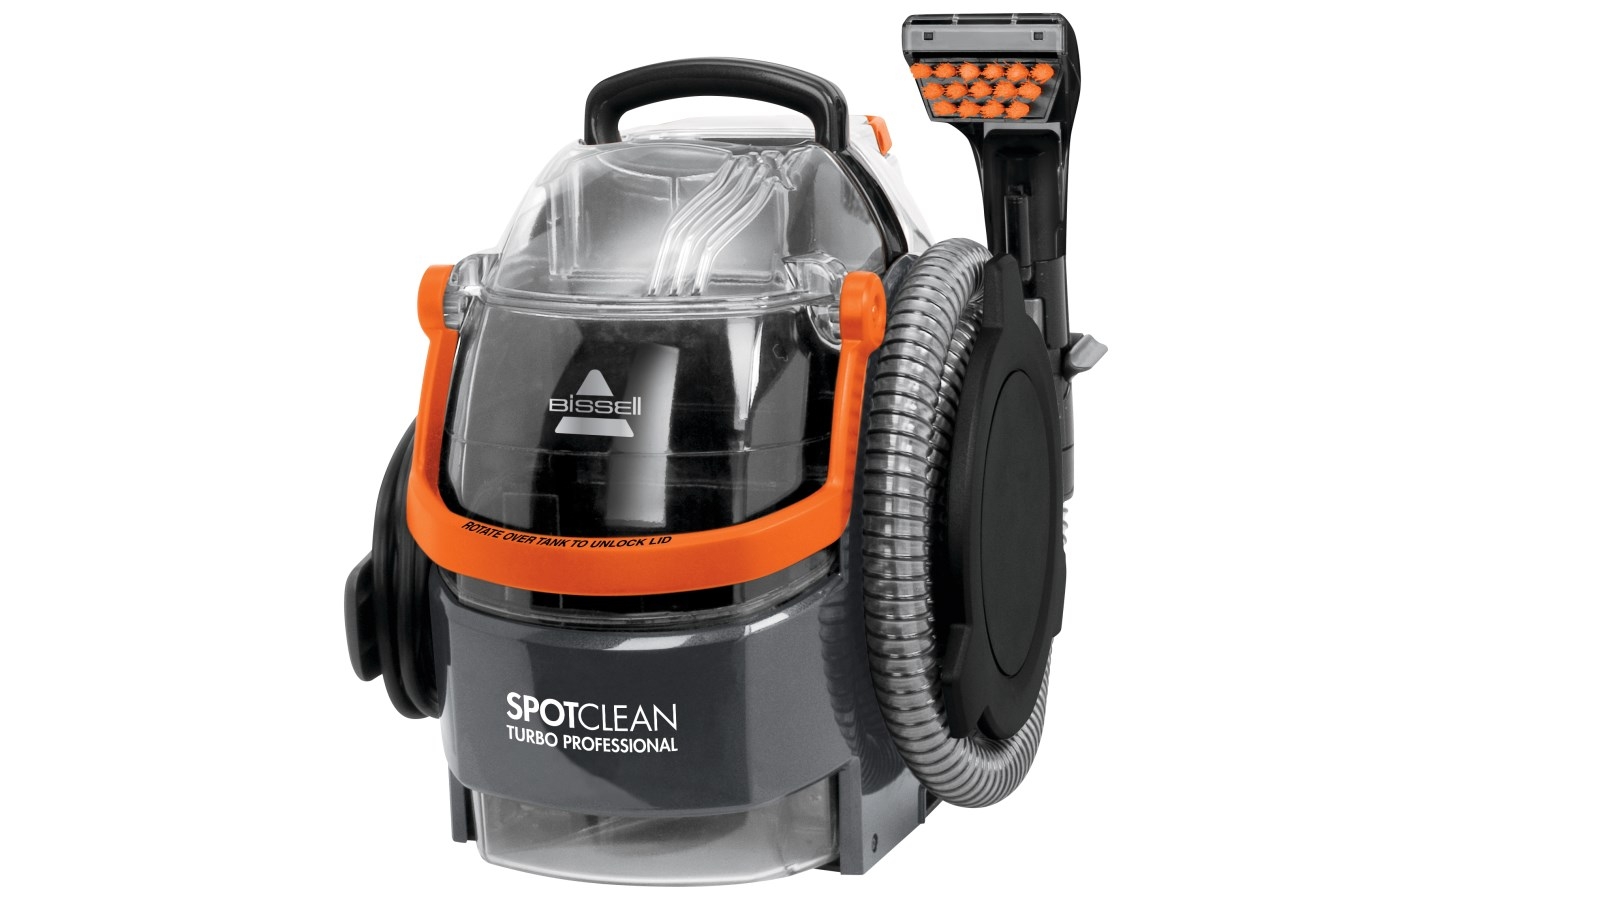 Bissell SpotClean Turbo Professional Portable Carpet & Upholstery Washer